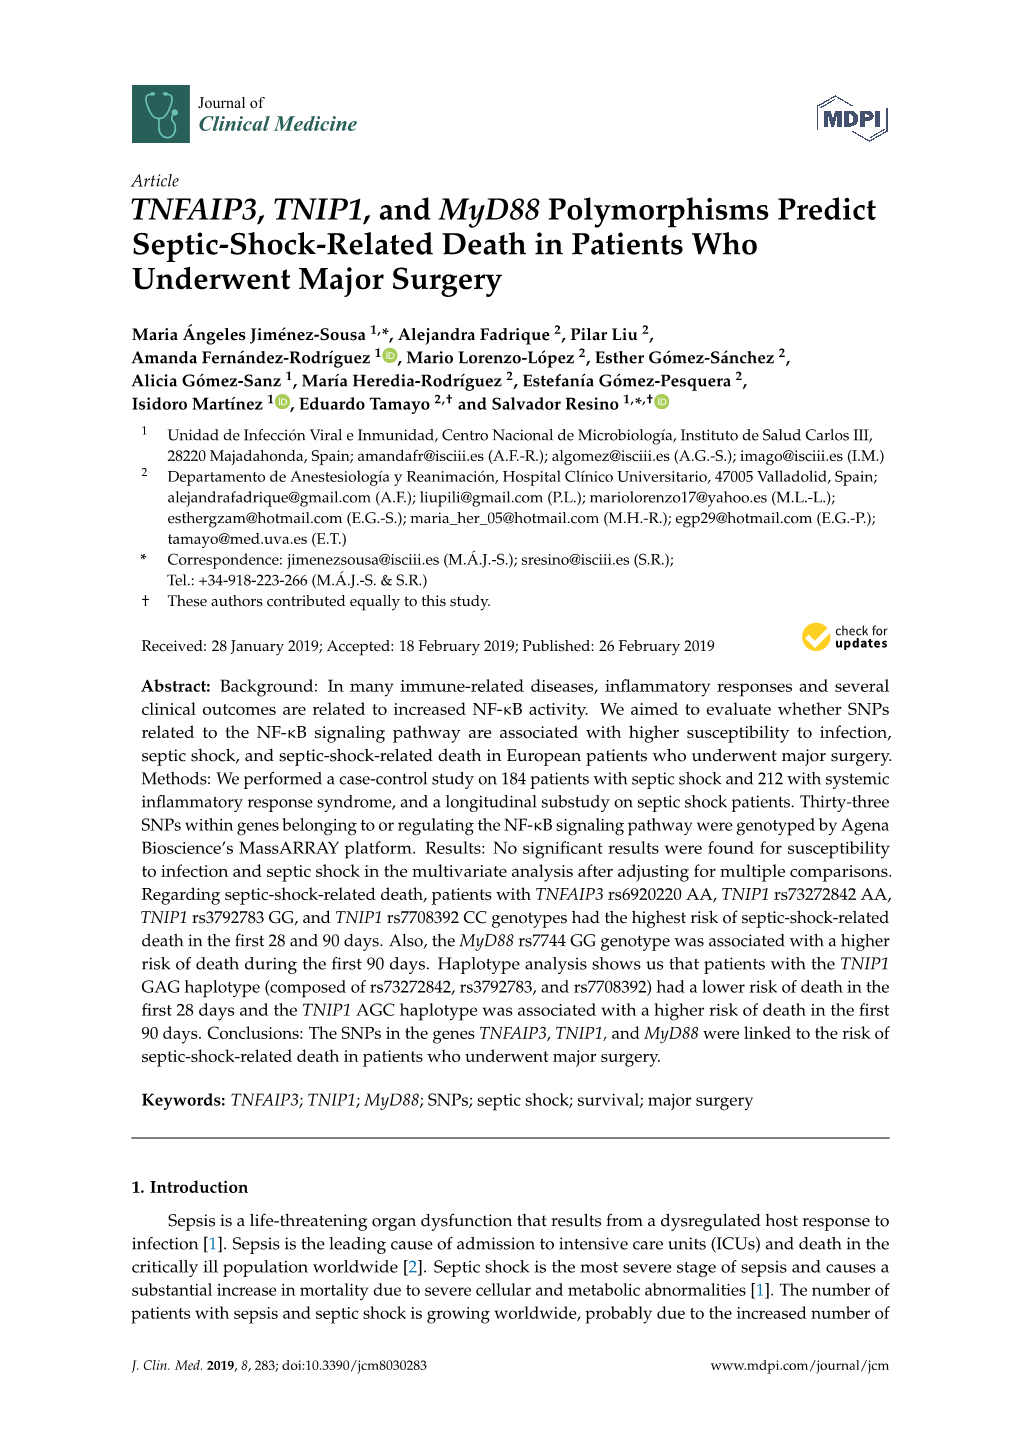 TNFAIP3, TNIP1, and Myd88 Polymorphisms Predict Septic-Shock-Related Death in Patients Who Underwent Major Surgery